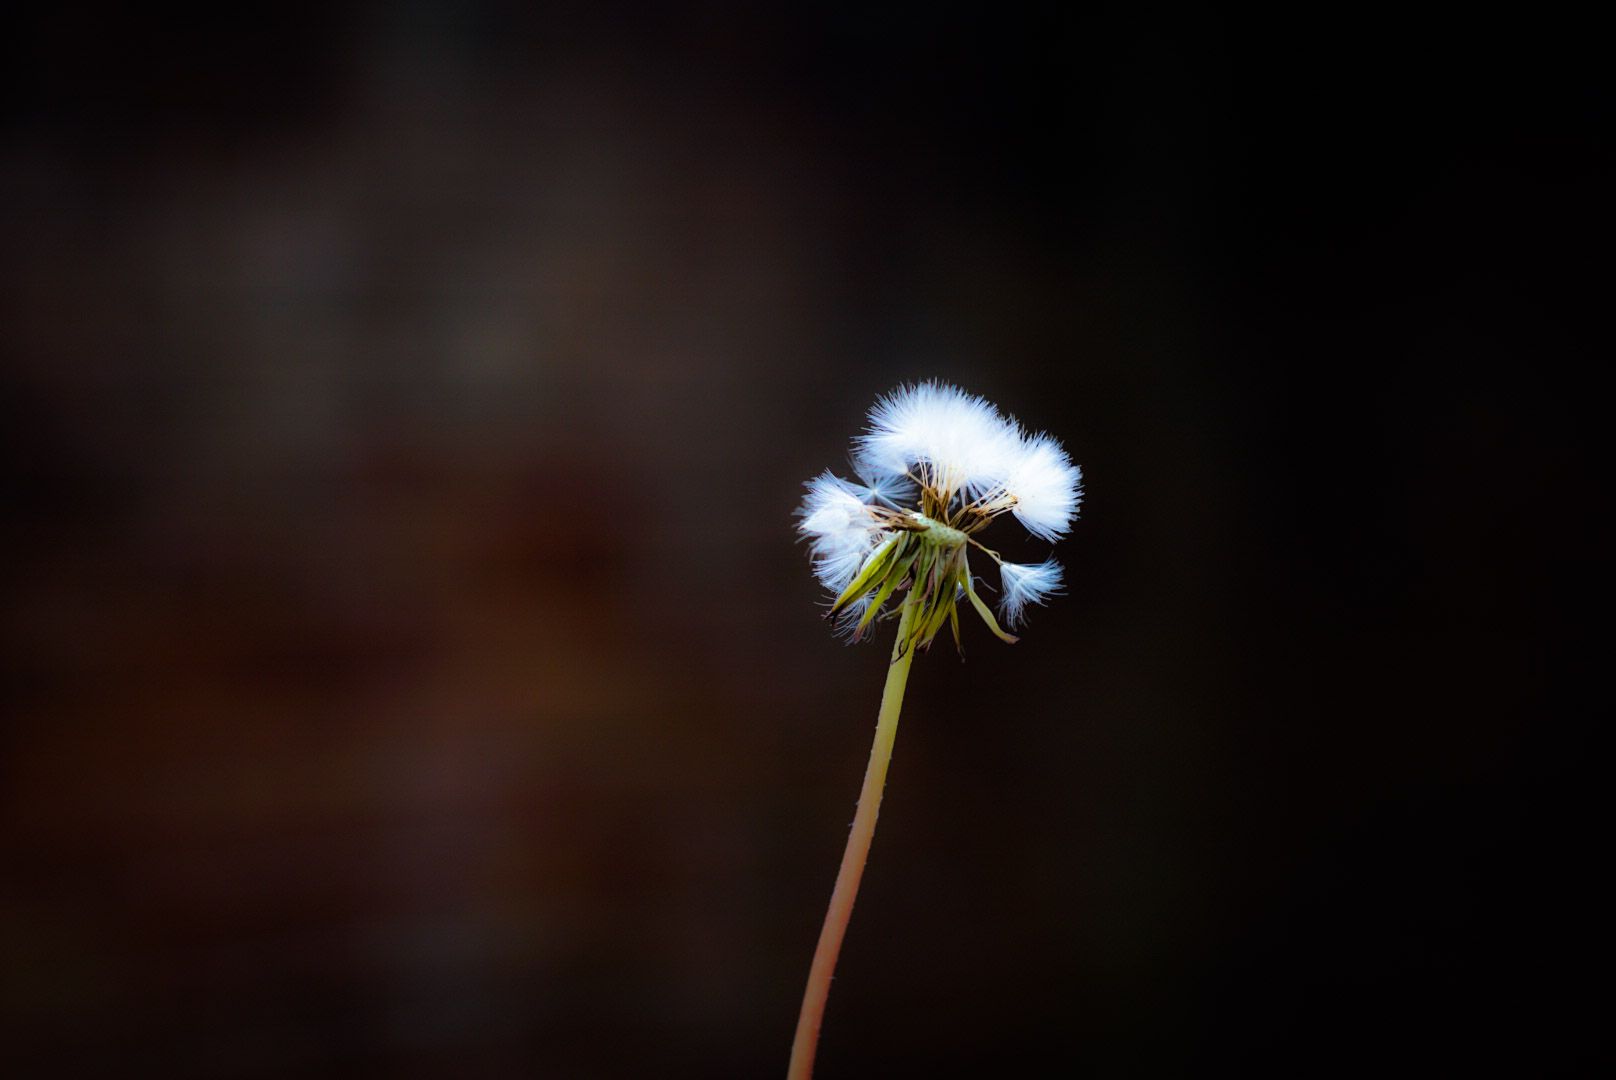 Wallpaper, flower, nature, Photohop, photography, weeds, Sony, seed, sigma, dandelion, 60mm, seedling, a psexpress, ilce sonya6000 1616x1080